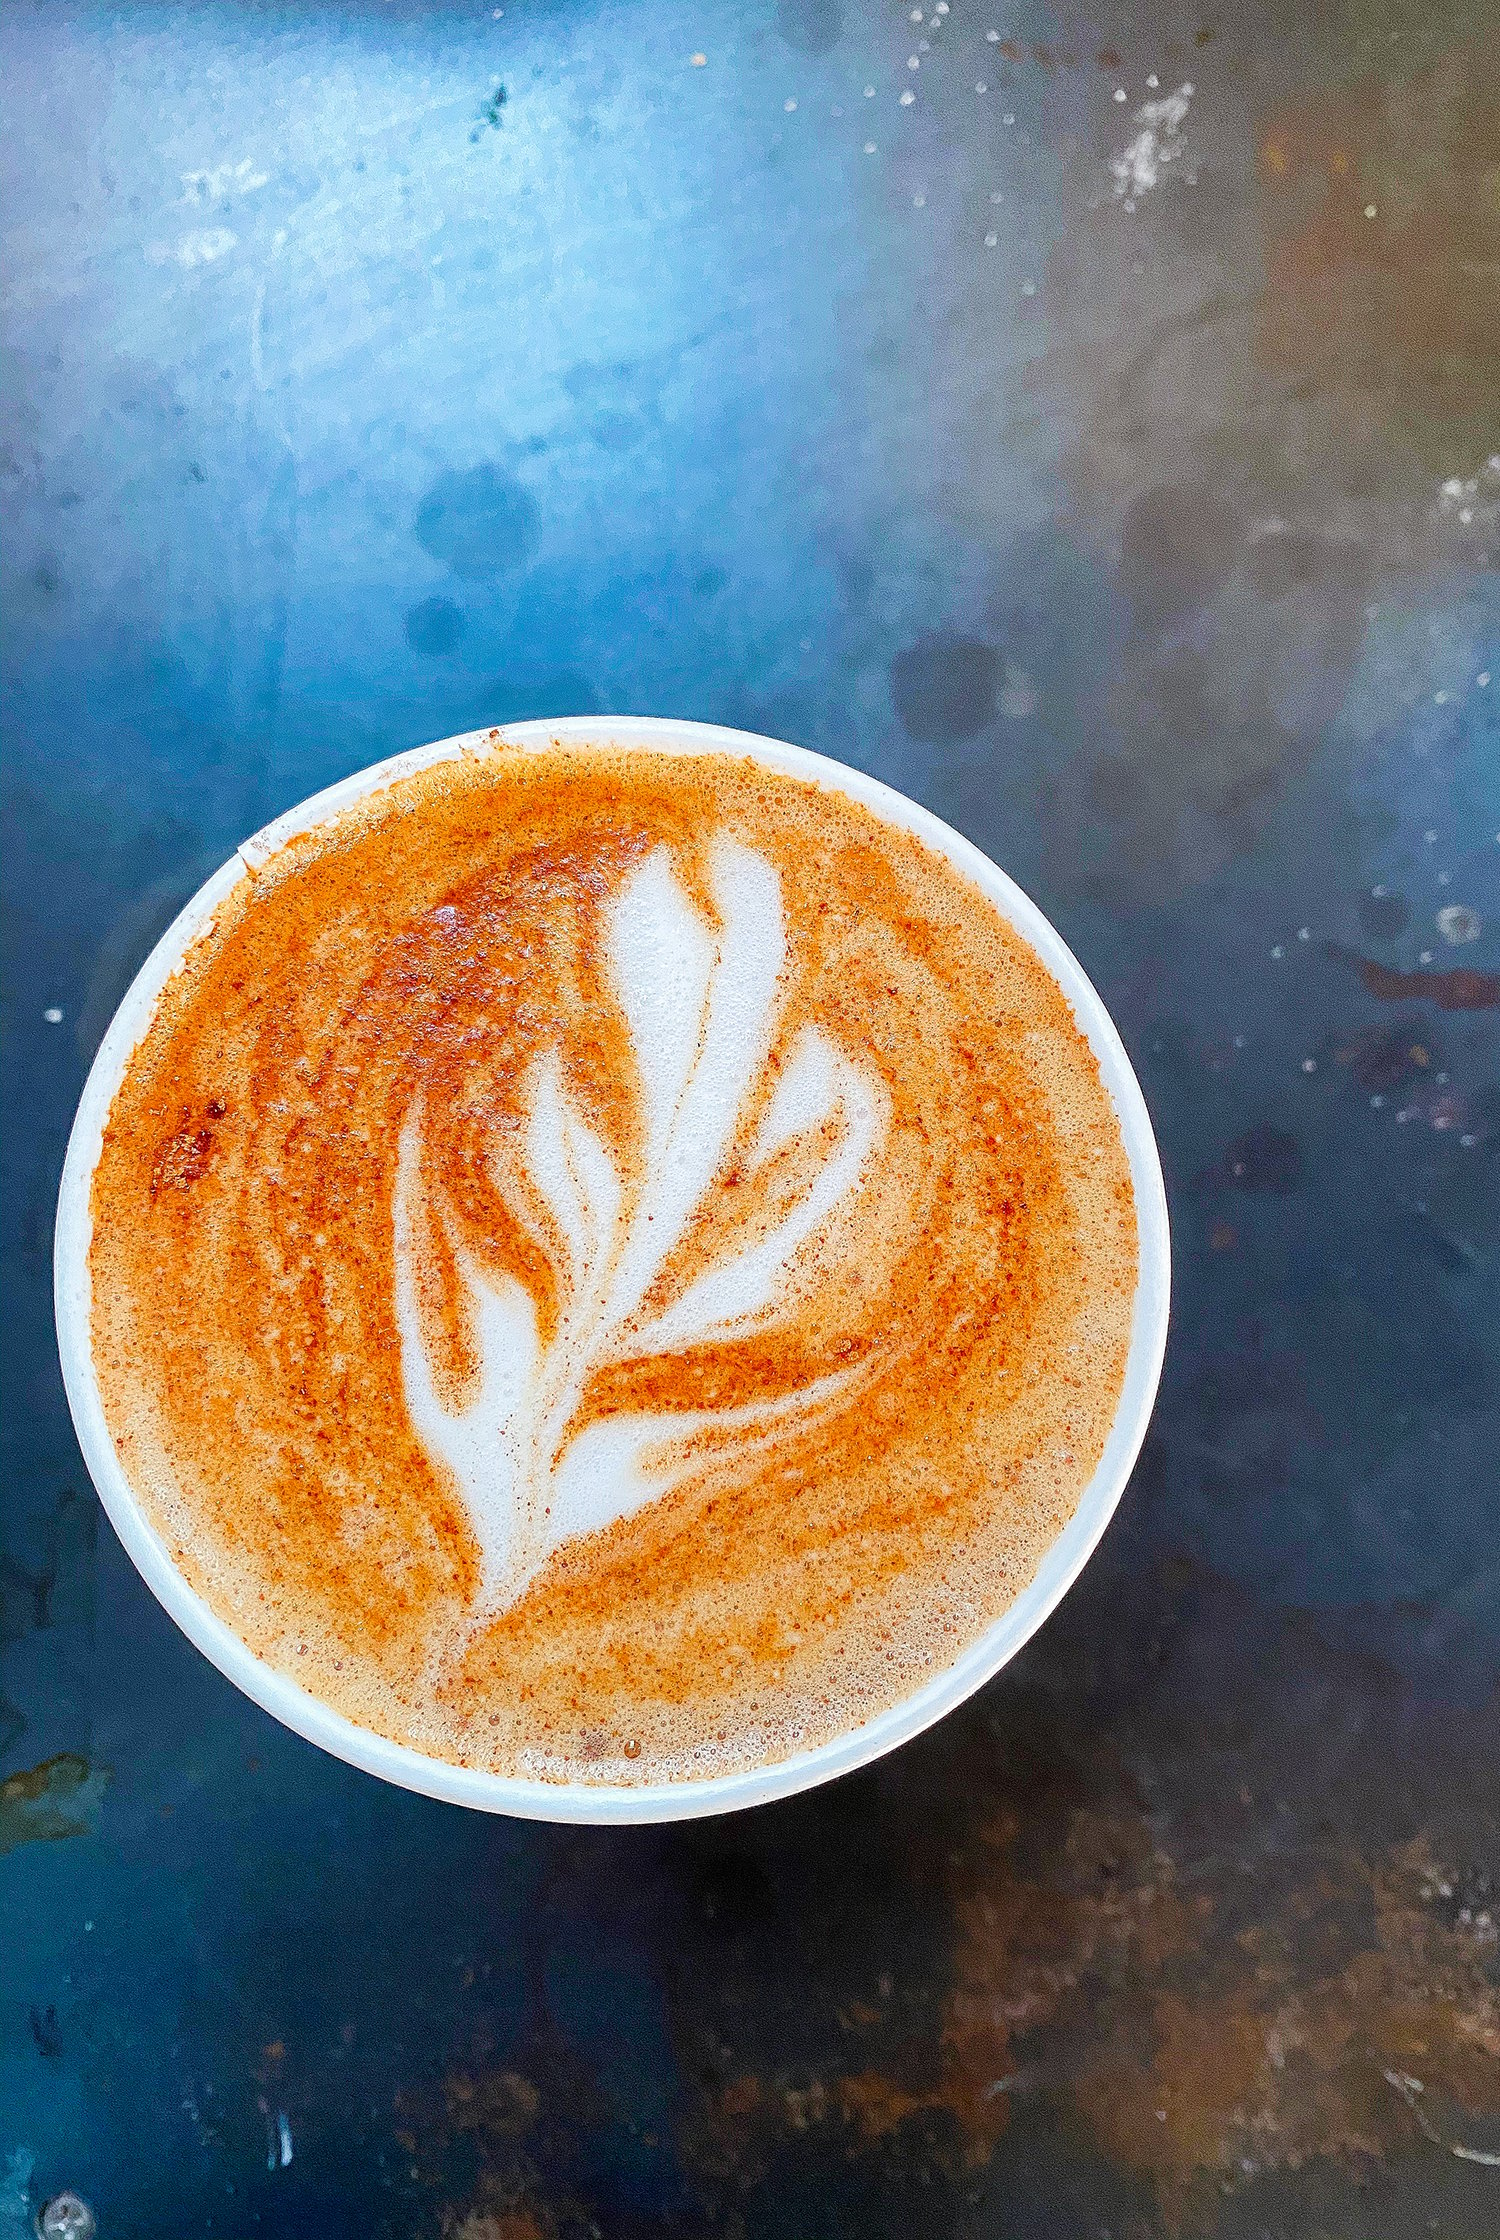 Looking for the best coffee shops in San Diego? This is a list of must visit coffee bars when you're in the area!